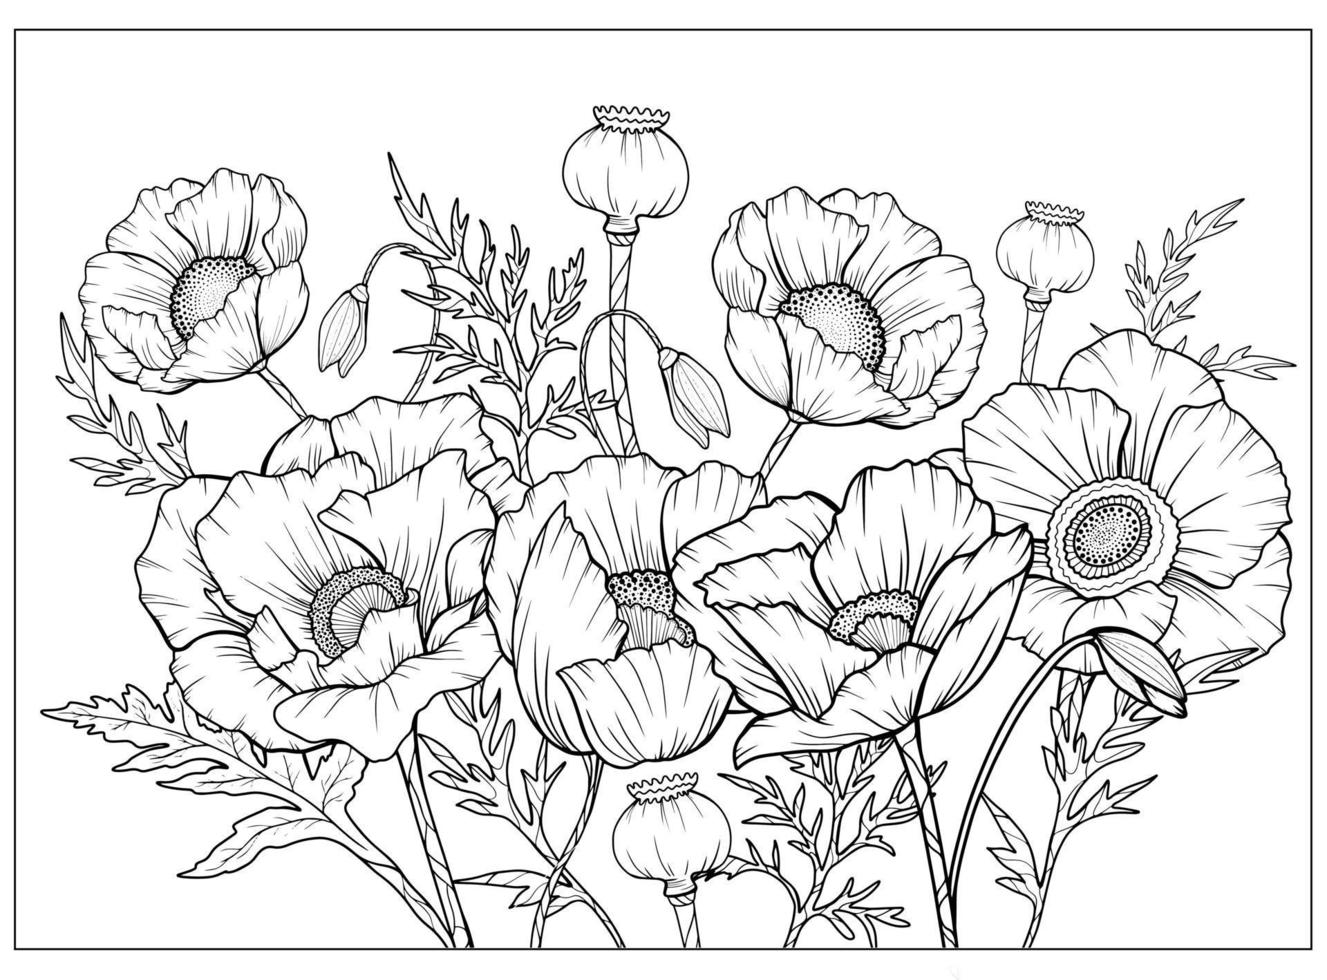 Coloring page with poppies and leaves. Vector page for coloring ...